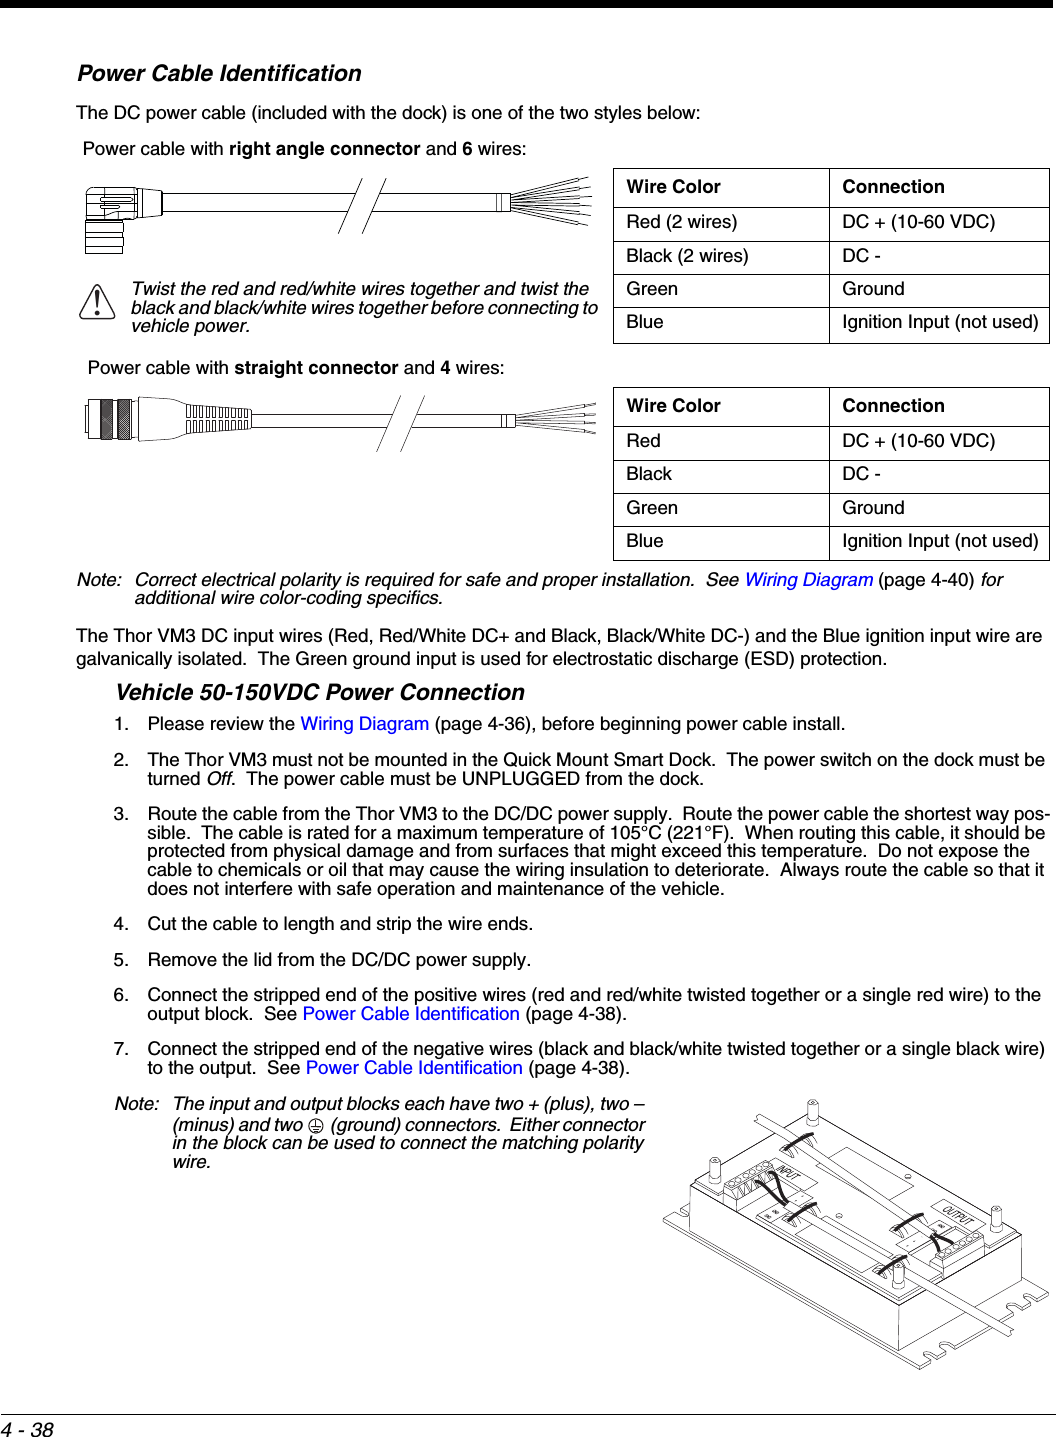 4 - 38Power Cable IdentificationThe DC power cable (included with the dock) is one of the two styles below:Note: Correct electrical polarity is required for safe and proper installation.  See Wiring Diagram (page 4-40) for additional wire color-coding specifics.The Thor VM3 DC input wires (Red, Red/White DC+ and Black, Black/White DC-) and the Blue ignition input wire are galvanically isolated.  The Green ground input is used for electrostatic discharge (ESD) protection.Vehicle 50-150VDC Power Connection1. Please review the Wiring Diagram (page 4-36), before beginning power cable install.  2. The Thor VM3 must not be mounted in the Quick Mount Smart Dock.  The power switch on the dock must be turned Off.  The power cable must be UNPLUGGED from the dock.3. Route the cable from the Thor VM3 to the DC/DC power supply.  Route the power cable the shortest way pos-sible.  The cable is rated for a maximum temperature of 105°C (221°F).  When routing this cable, it should be protected from physical damage and from surfaces that might exceed this temperature.  Do not expose the cable to chemicals or oil that may cause the wiring insulation to deteriorate.  Always route the cable so that it does not interfere with safe operation and maintenance of the vehicle.4. Cut the cable to length and strip the wire ends.5. Remove the lid from the DC/DC power supply.6. Connect the stripped end of the positive wires (red and red/white twisted together or a single red wire) to the output block.  See Power Cable Identification (page 4-38).7. Connect the stripped end of the negative wires (black and black/white twisted together or a single black wire) to the output.  See Power Cable Identification (page 4-38).Note: The input and output blocks each have two + (plus), two – (minus) and two   (ground) connectors.  Either connector in the block can be used to connect the matching polarity wire.Power cable with right angle connector and 6 wires:Wire Color ConnectionRed (2 wires) DC + (10-60 VDC)Black (2 wires) DC -Twist the red and red/white wires together and twist the black and black/white wires together before connecting to vehicle power.Green GroundBlue Ignition Input (not used) Power cable with straight connector and 4 wires:Wire Color ConnectionRed DC + (10-60 VDC)Black DC -Green GroundBlue Ignition Input (not used)!